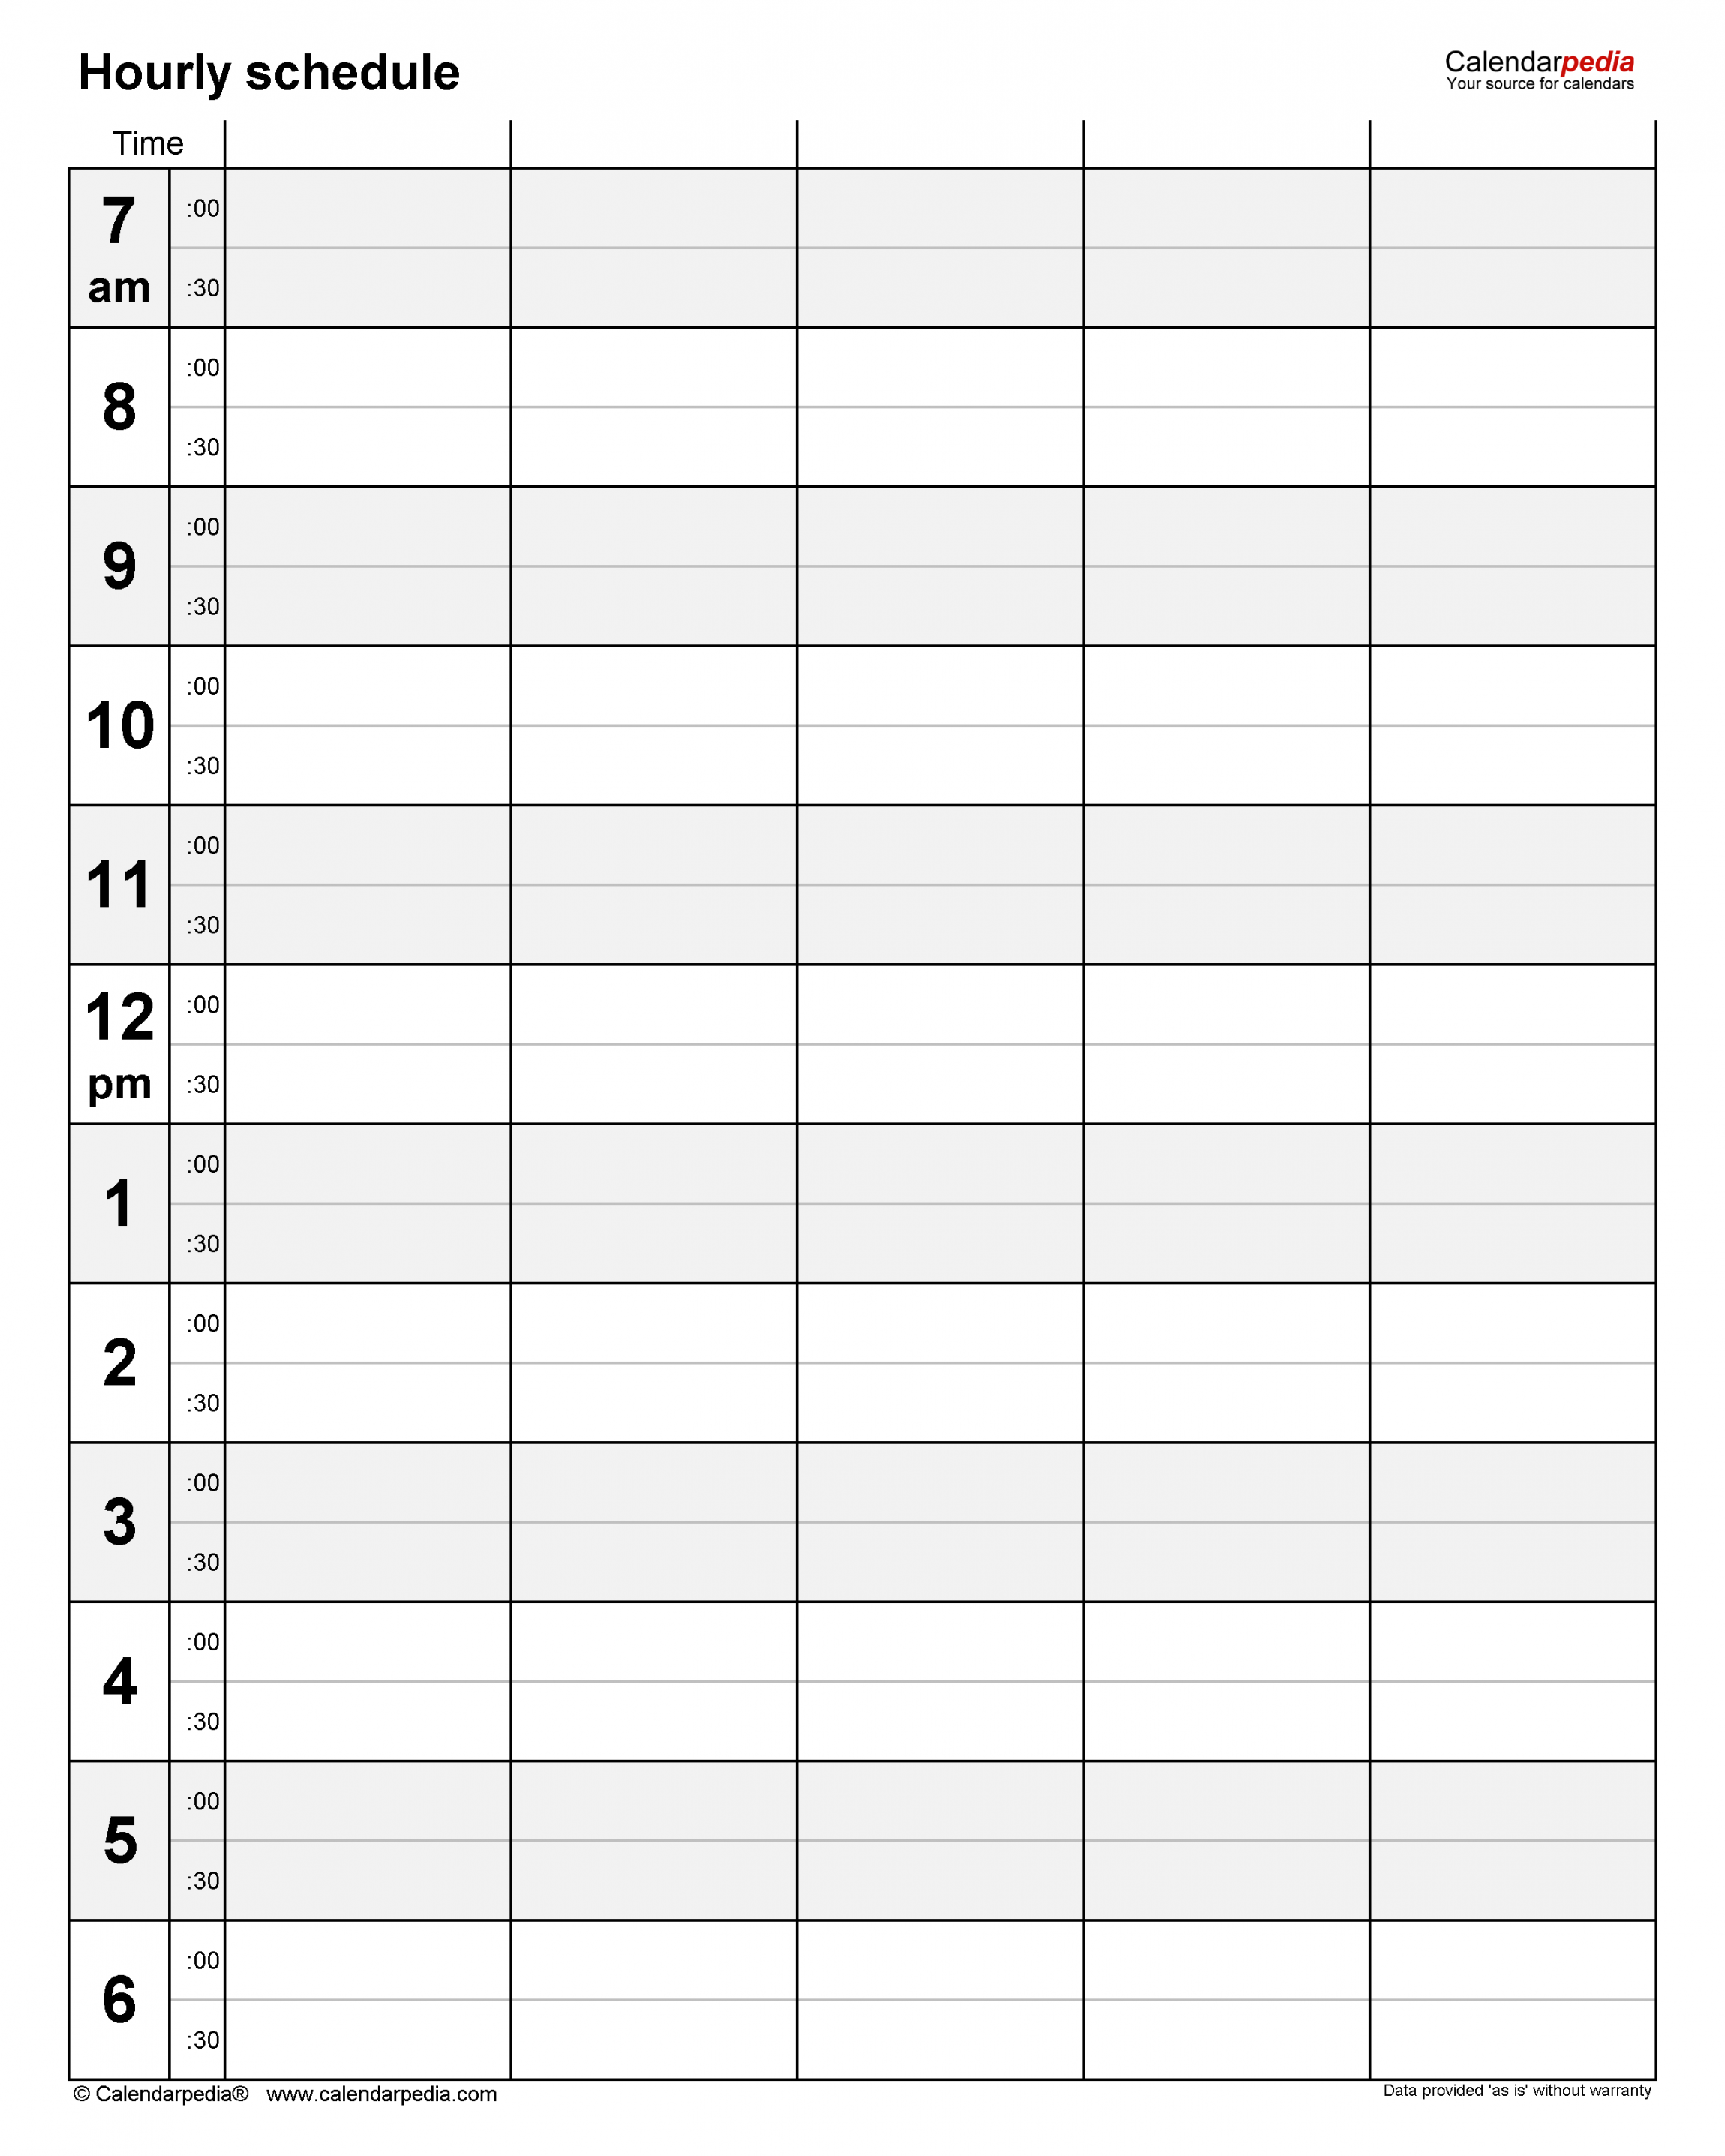 Free Hourly Schedules in PDF Format - + Templates